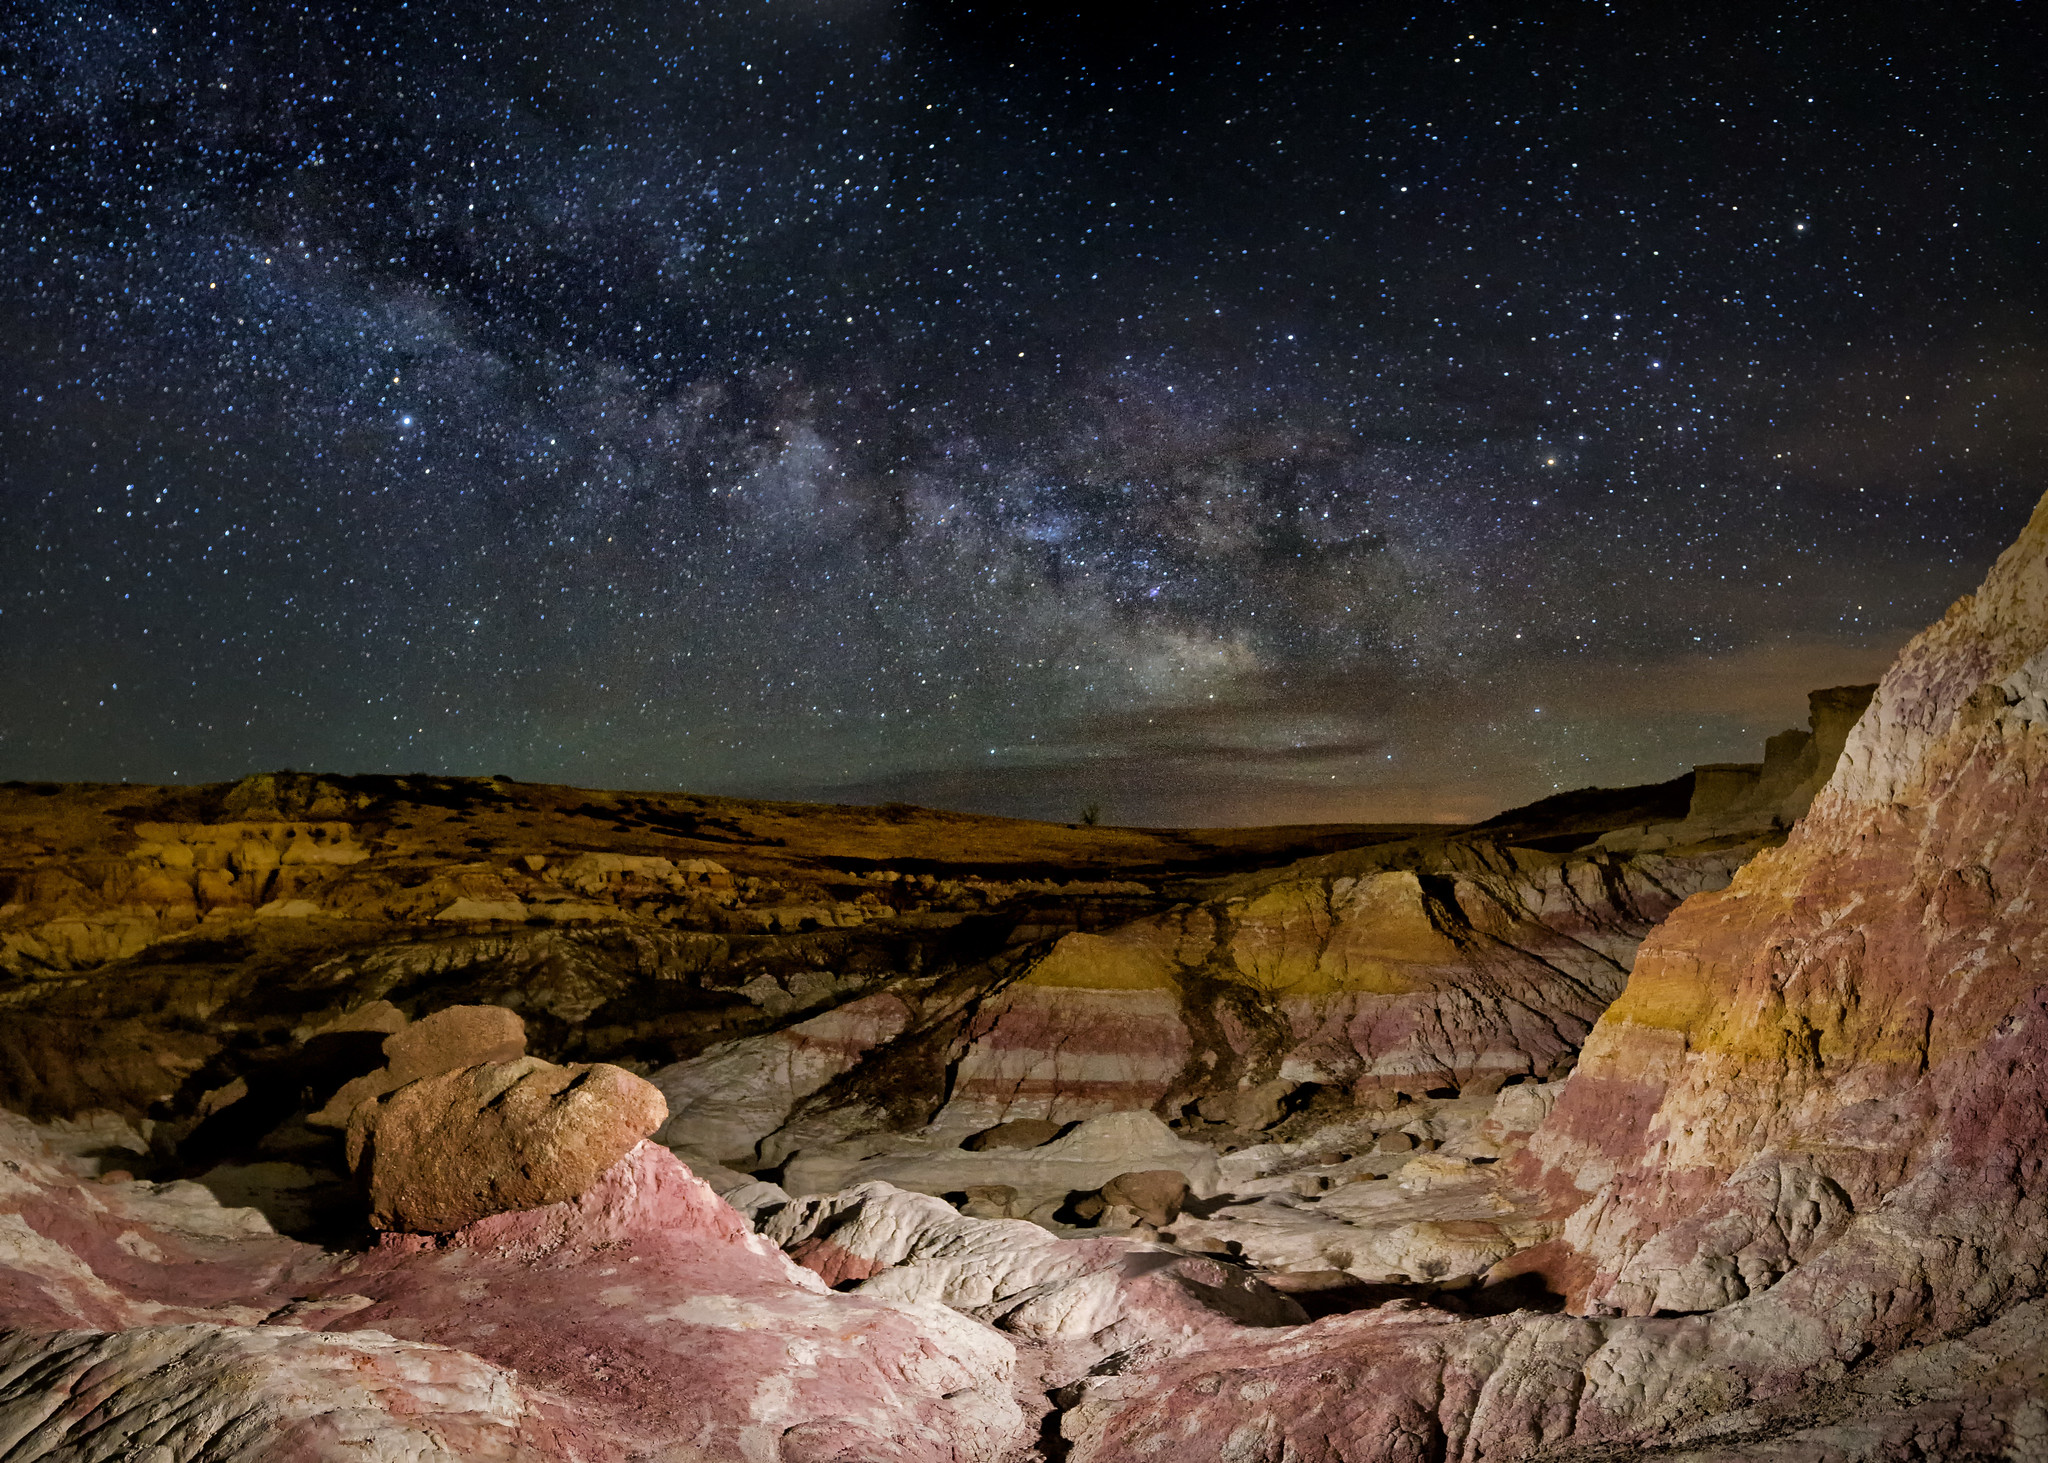 Milky Way over the Paint Mines